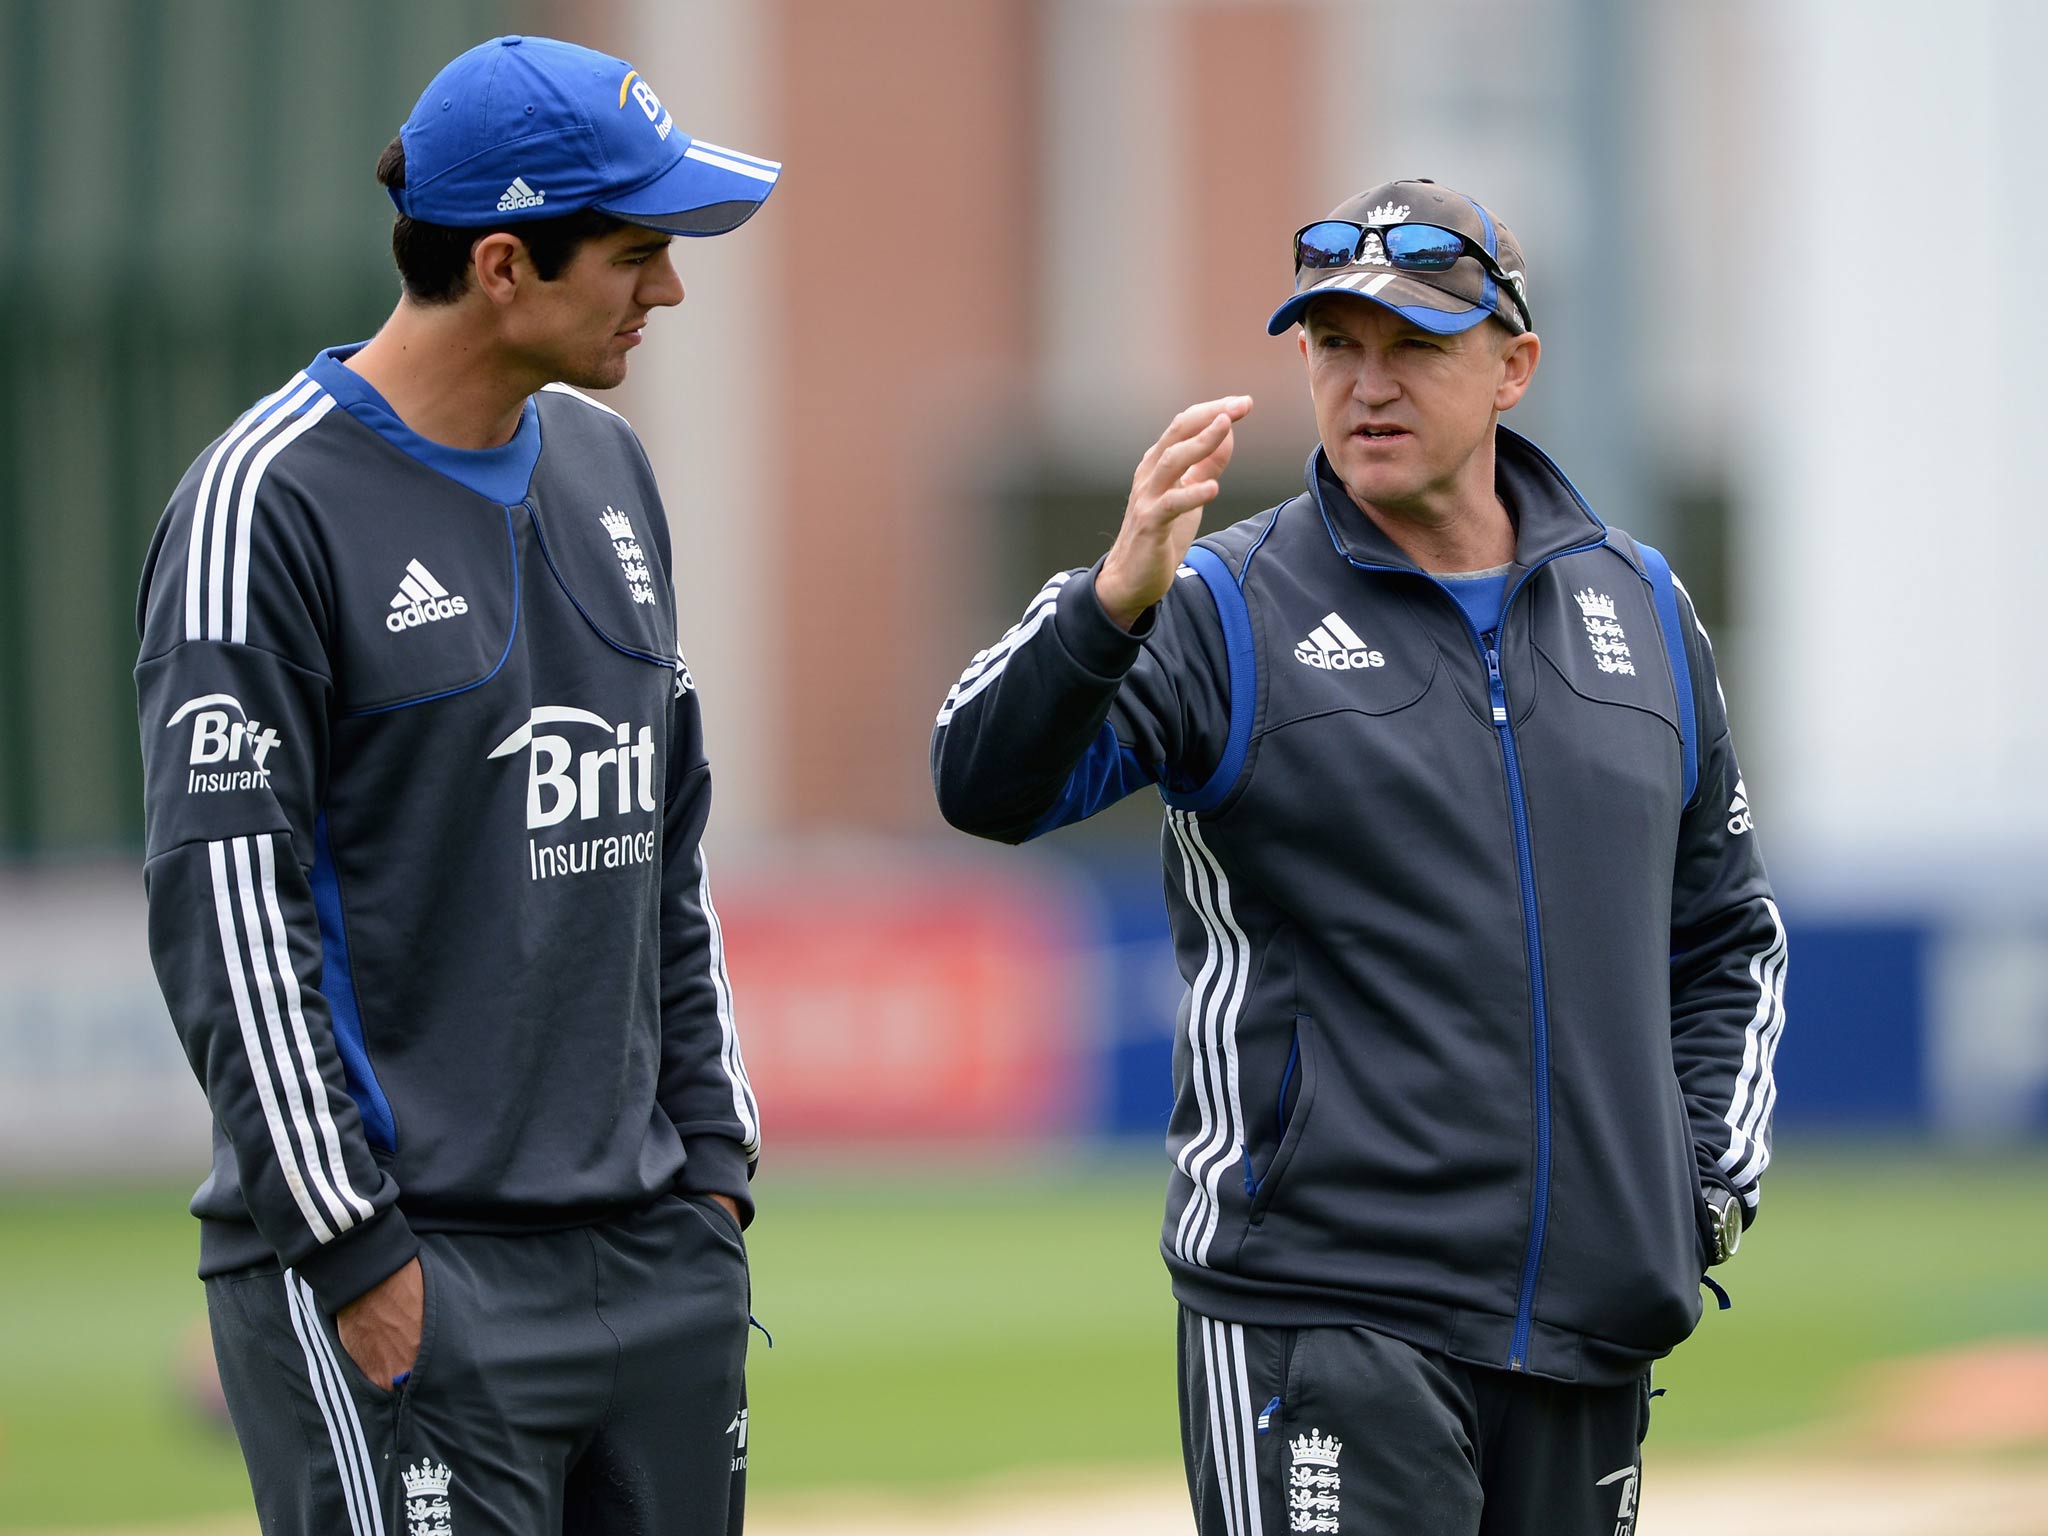 Andy Flower talks with Alistair Cook